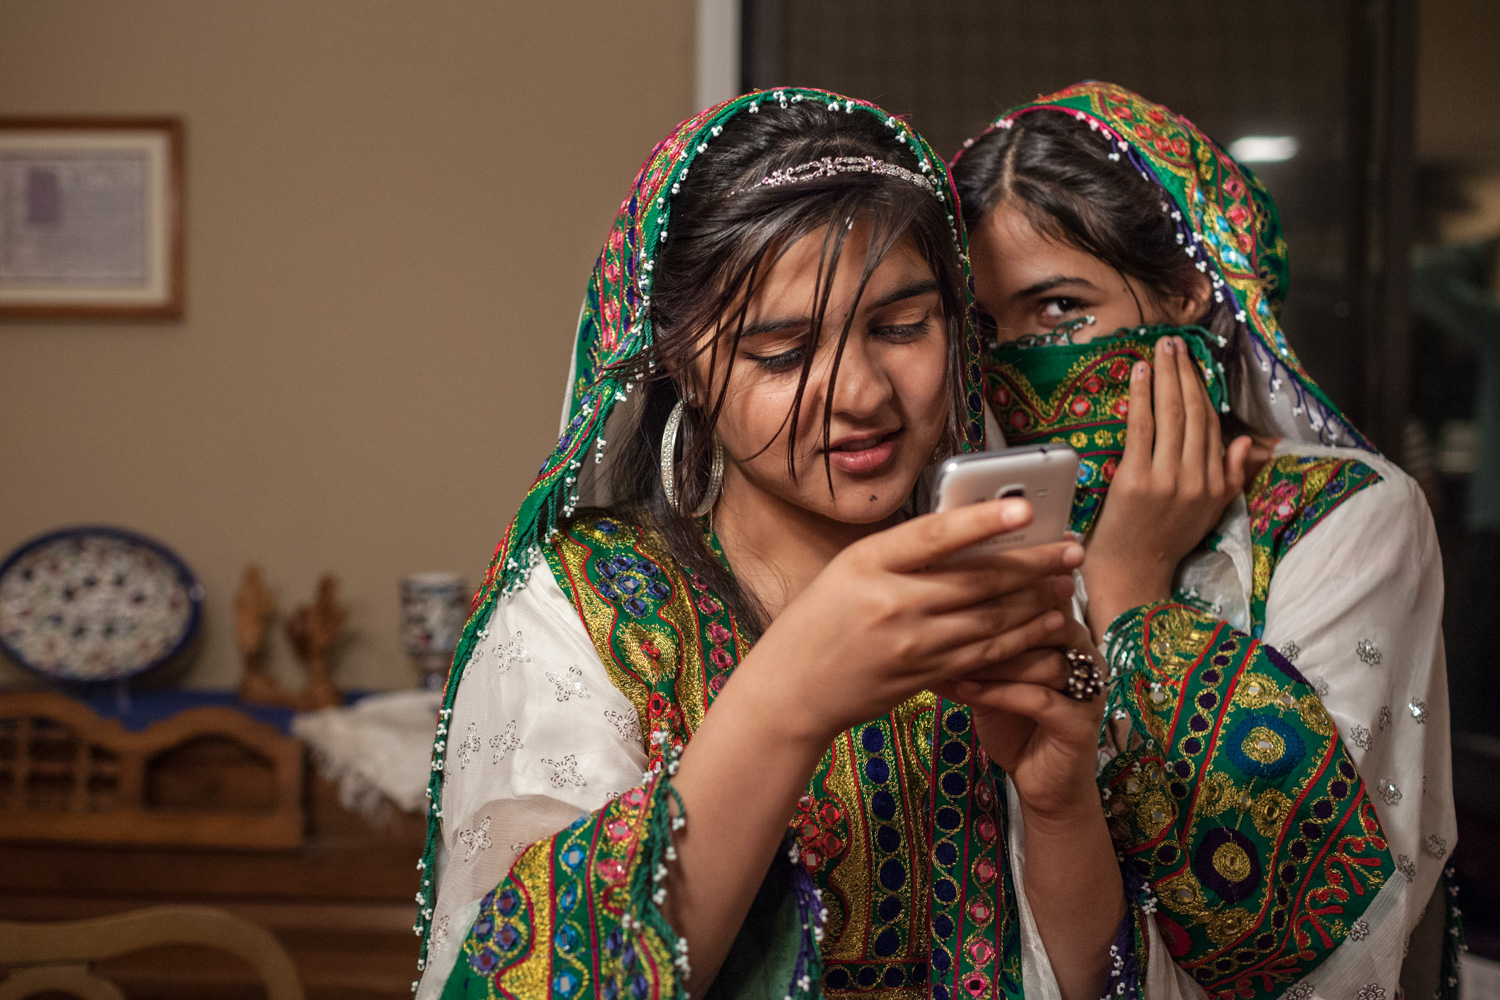  Maria and her sister, Naadia, celebrating their first American Thanksgiving after fleeing Afghanistan and coming to Georgia (November 2014). 